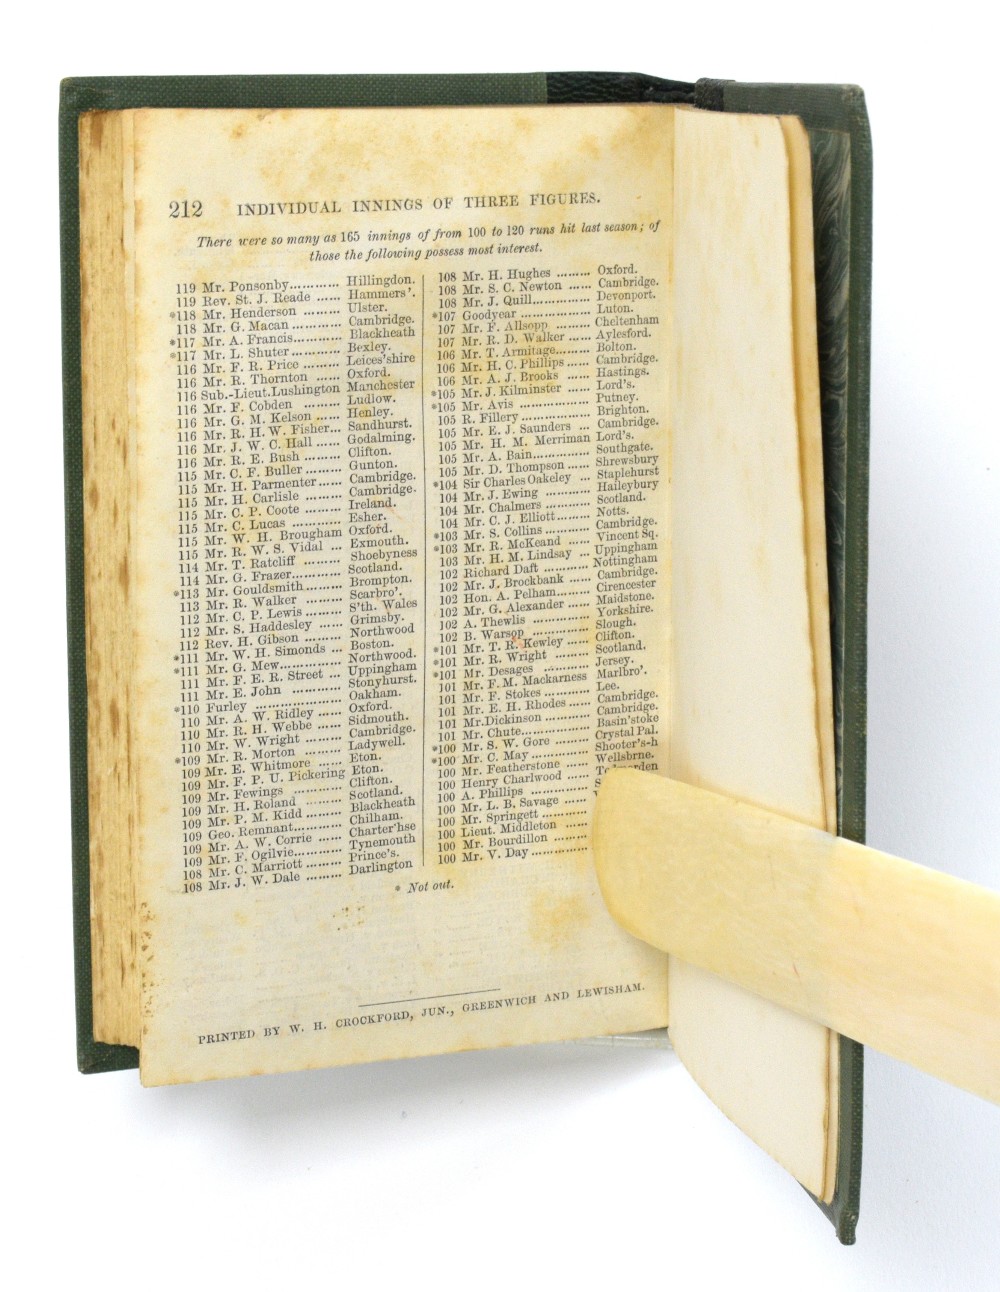 John Wisden's Cricketers' Almanack 1874-1875, 1874 180 pages, 1875, 212 pages, bound as a single - Image 8 of 11